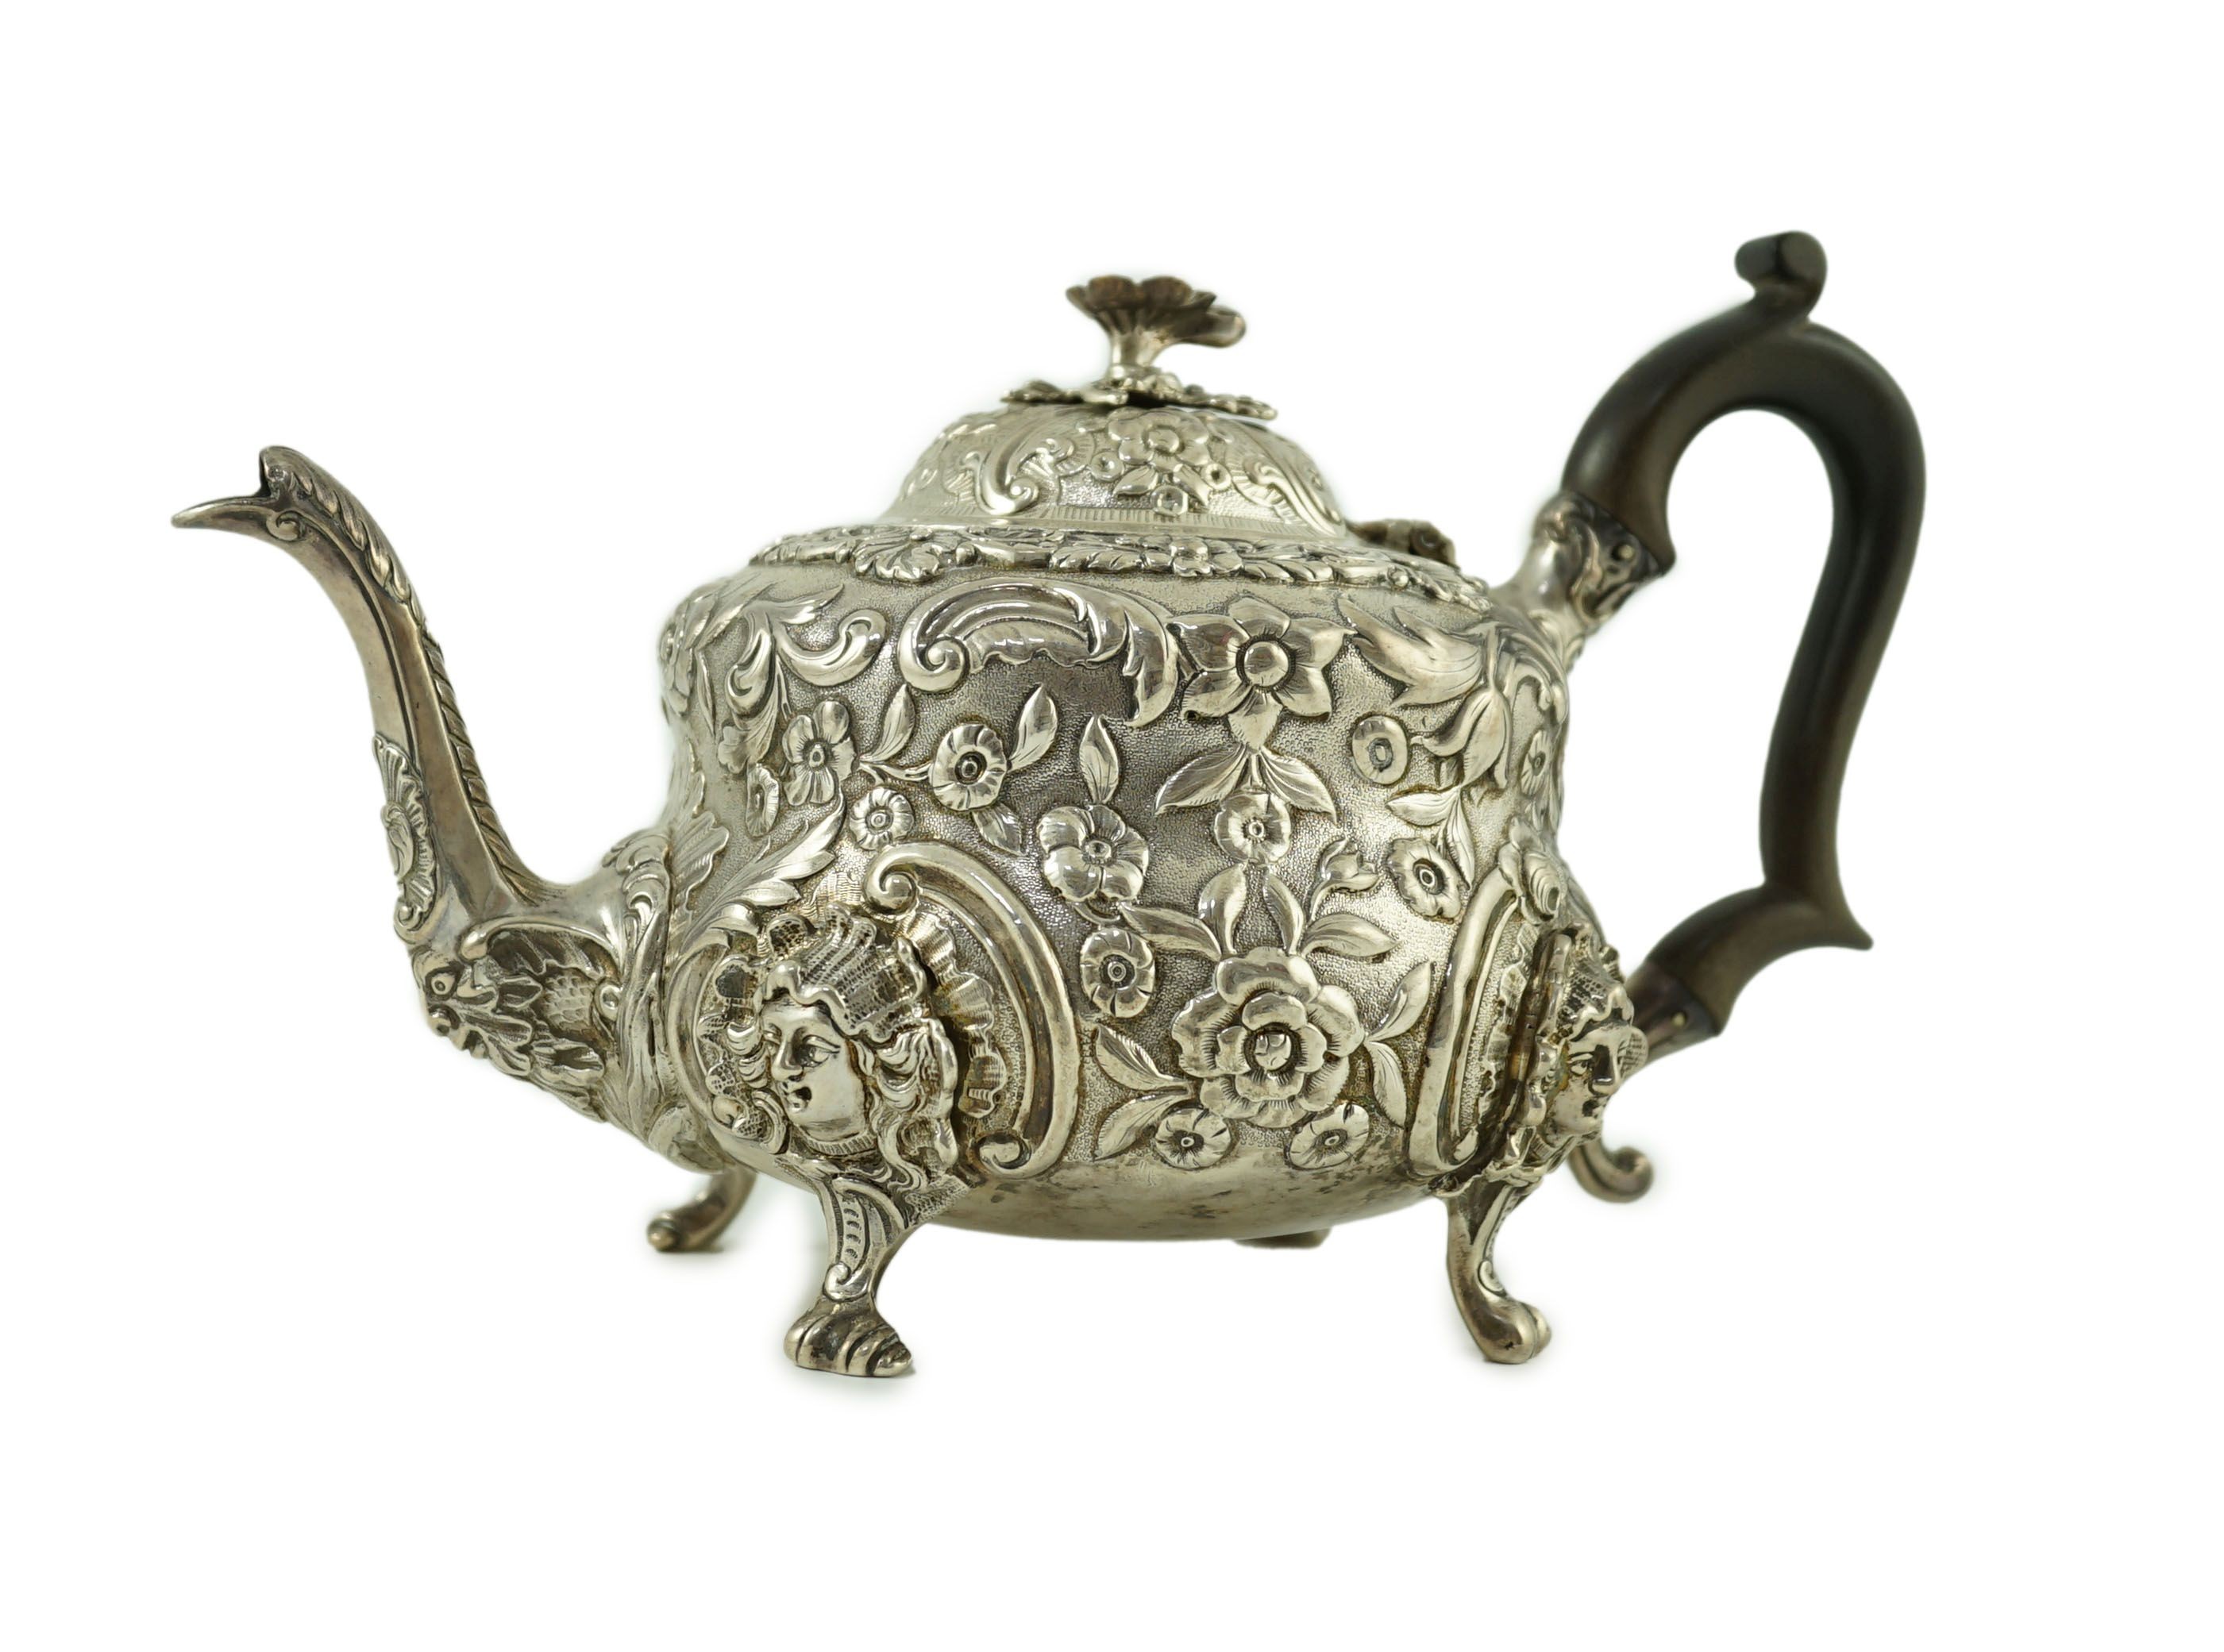 An early Victorian embossed silver teapot, by William Moulson